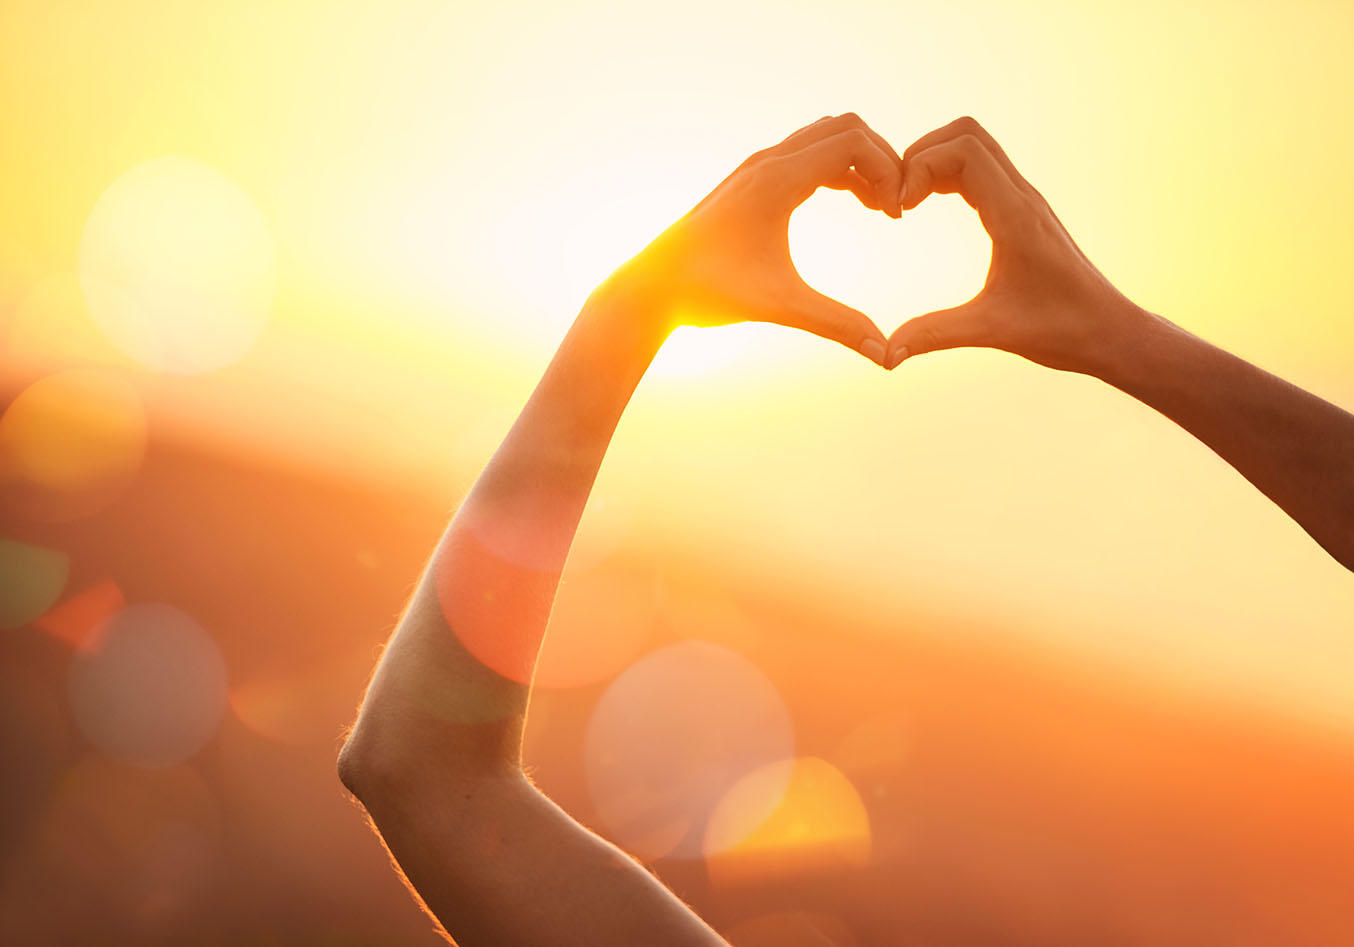 A woman holds up her hands to make a heart shape in the sun.